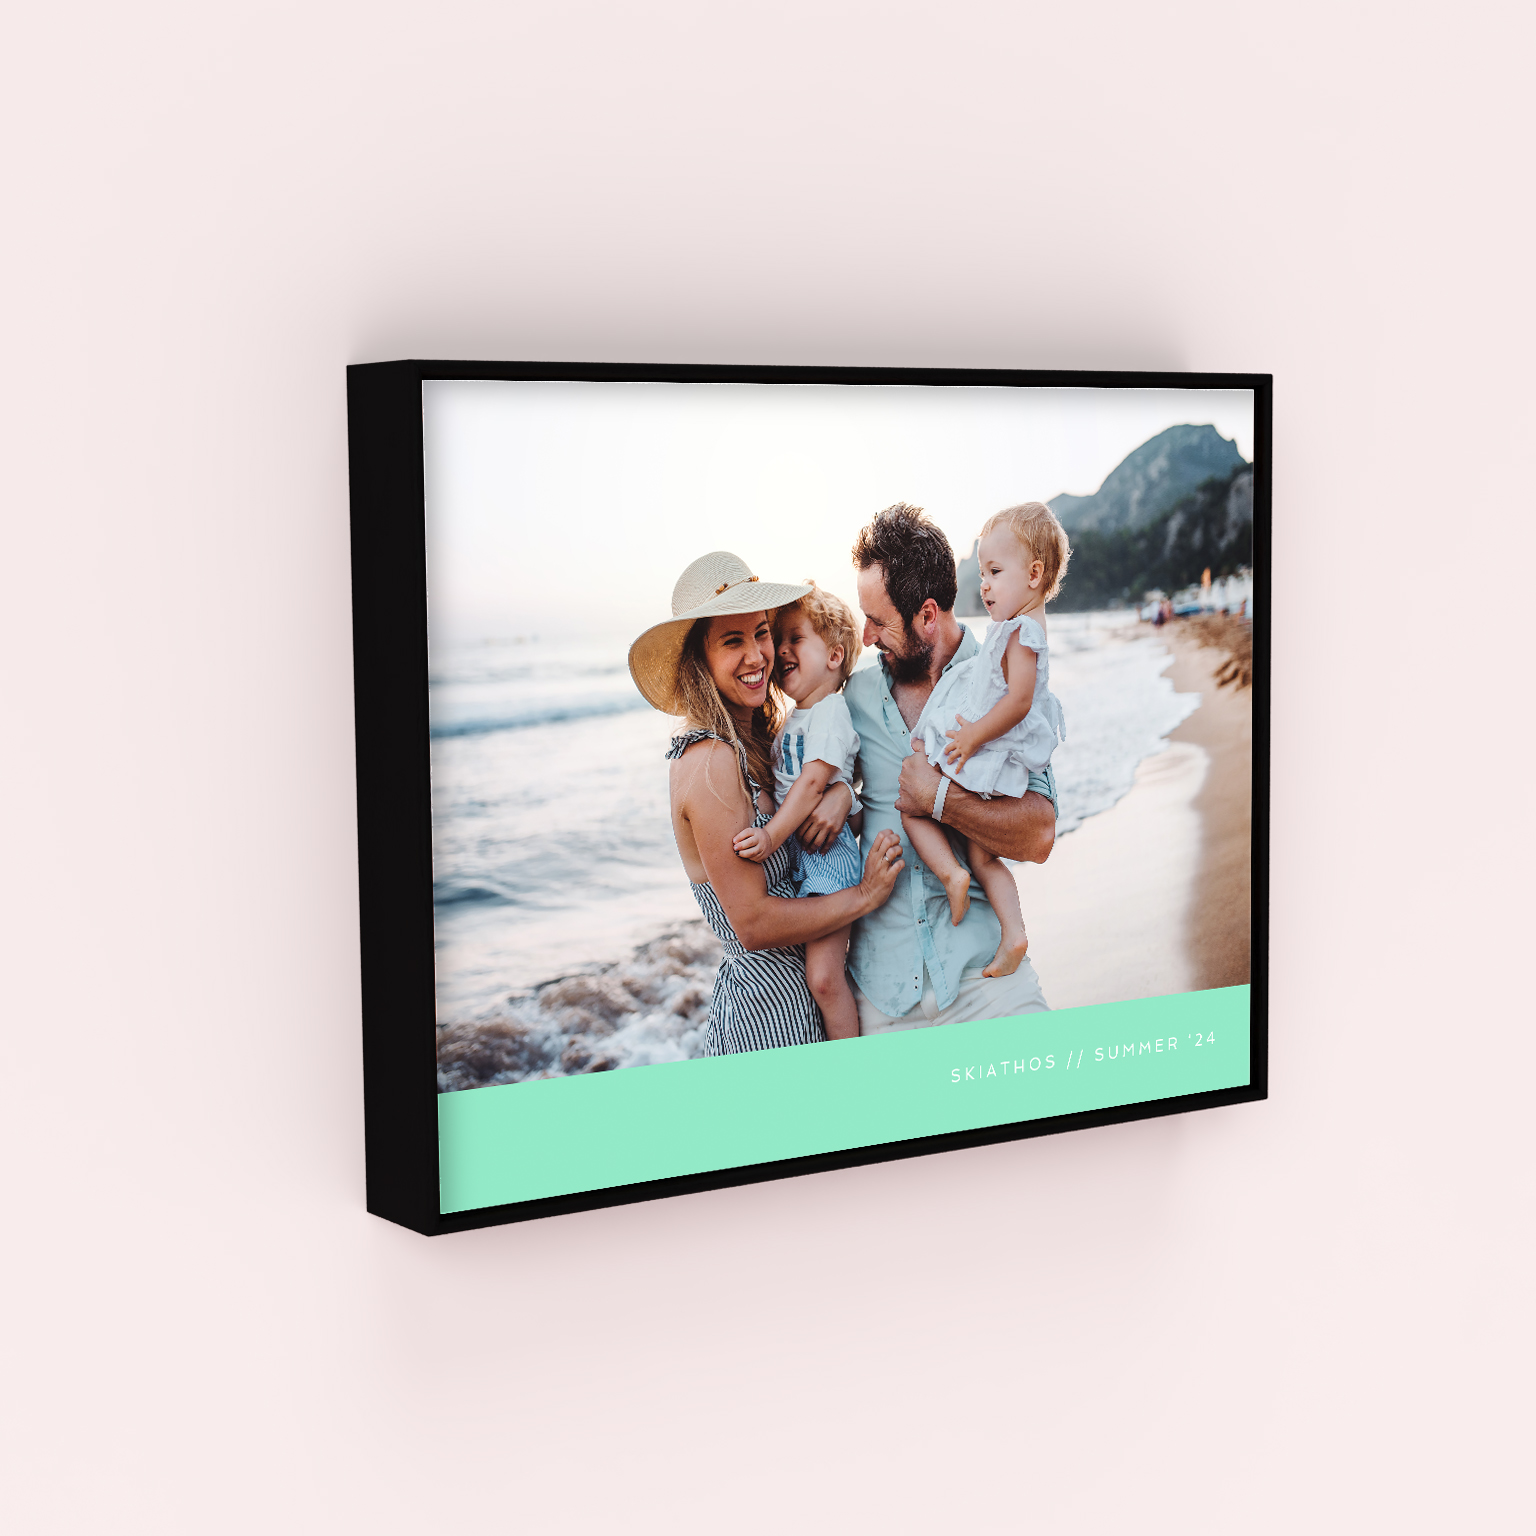 Framed Photo Canvas - Mint Bottom - A Stylish and Timeless Keepsake for Cherished Memories